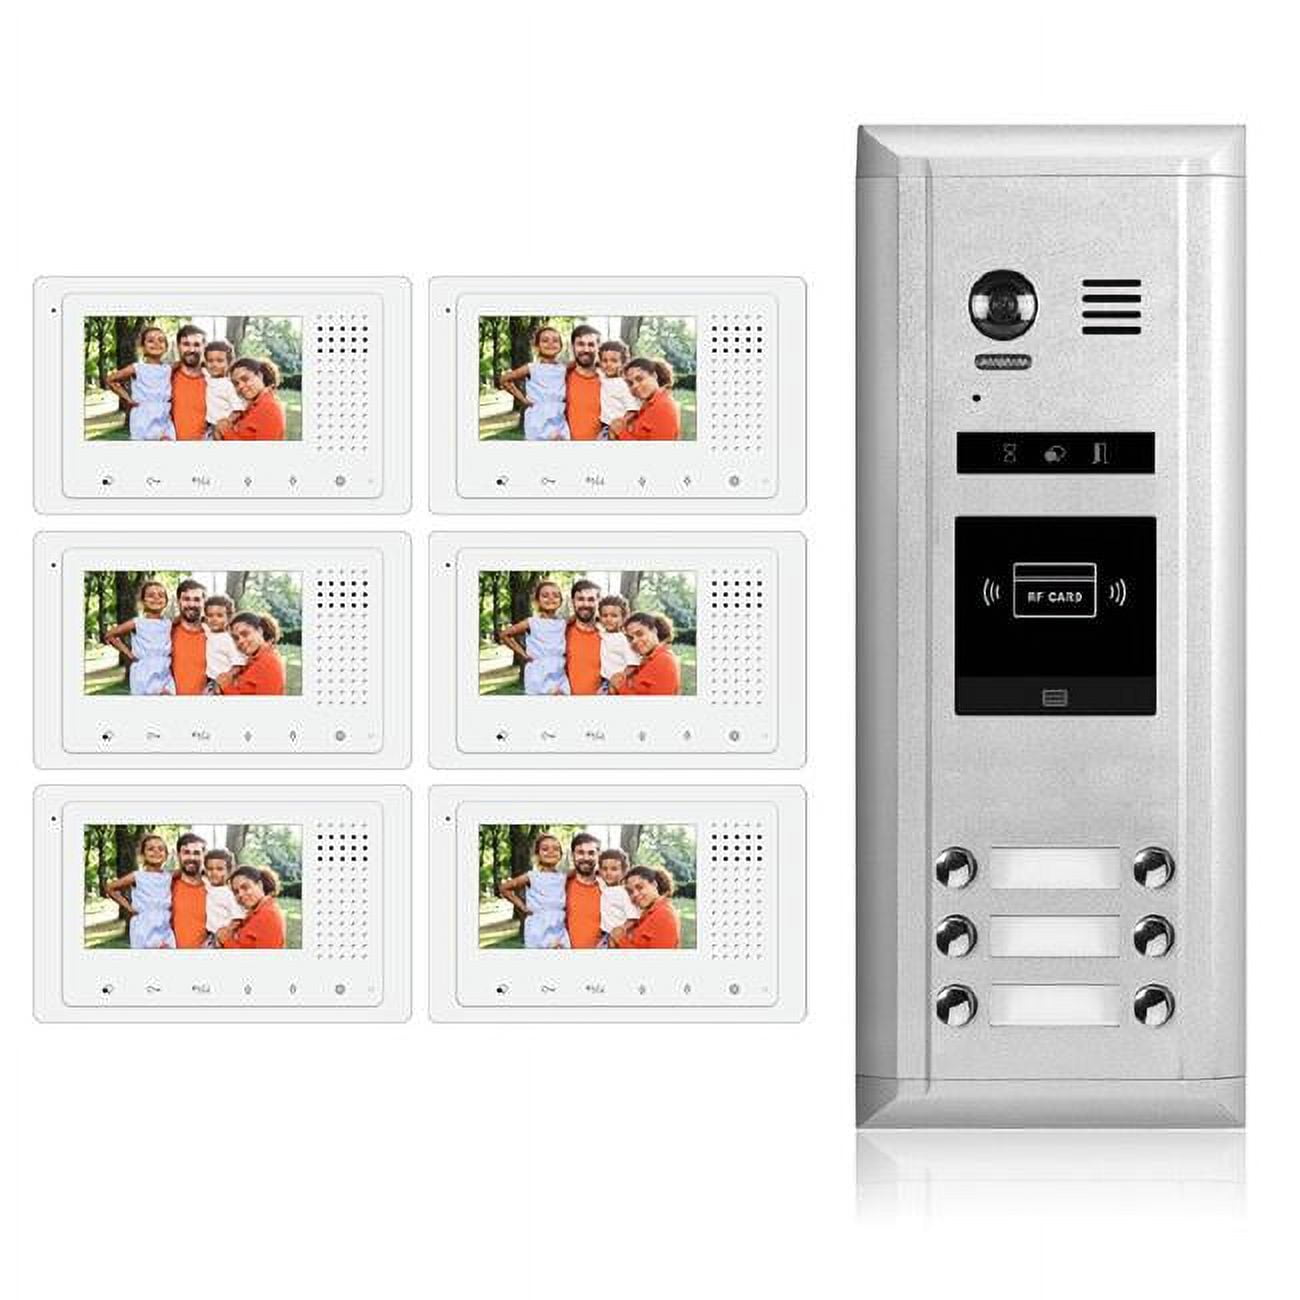 Picture of 2Easy Video Intercom System 1726-N Entry System DK43361S-ID 6 Apartment Audio & Video Kit with 6 Monitor